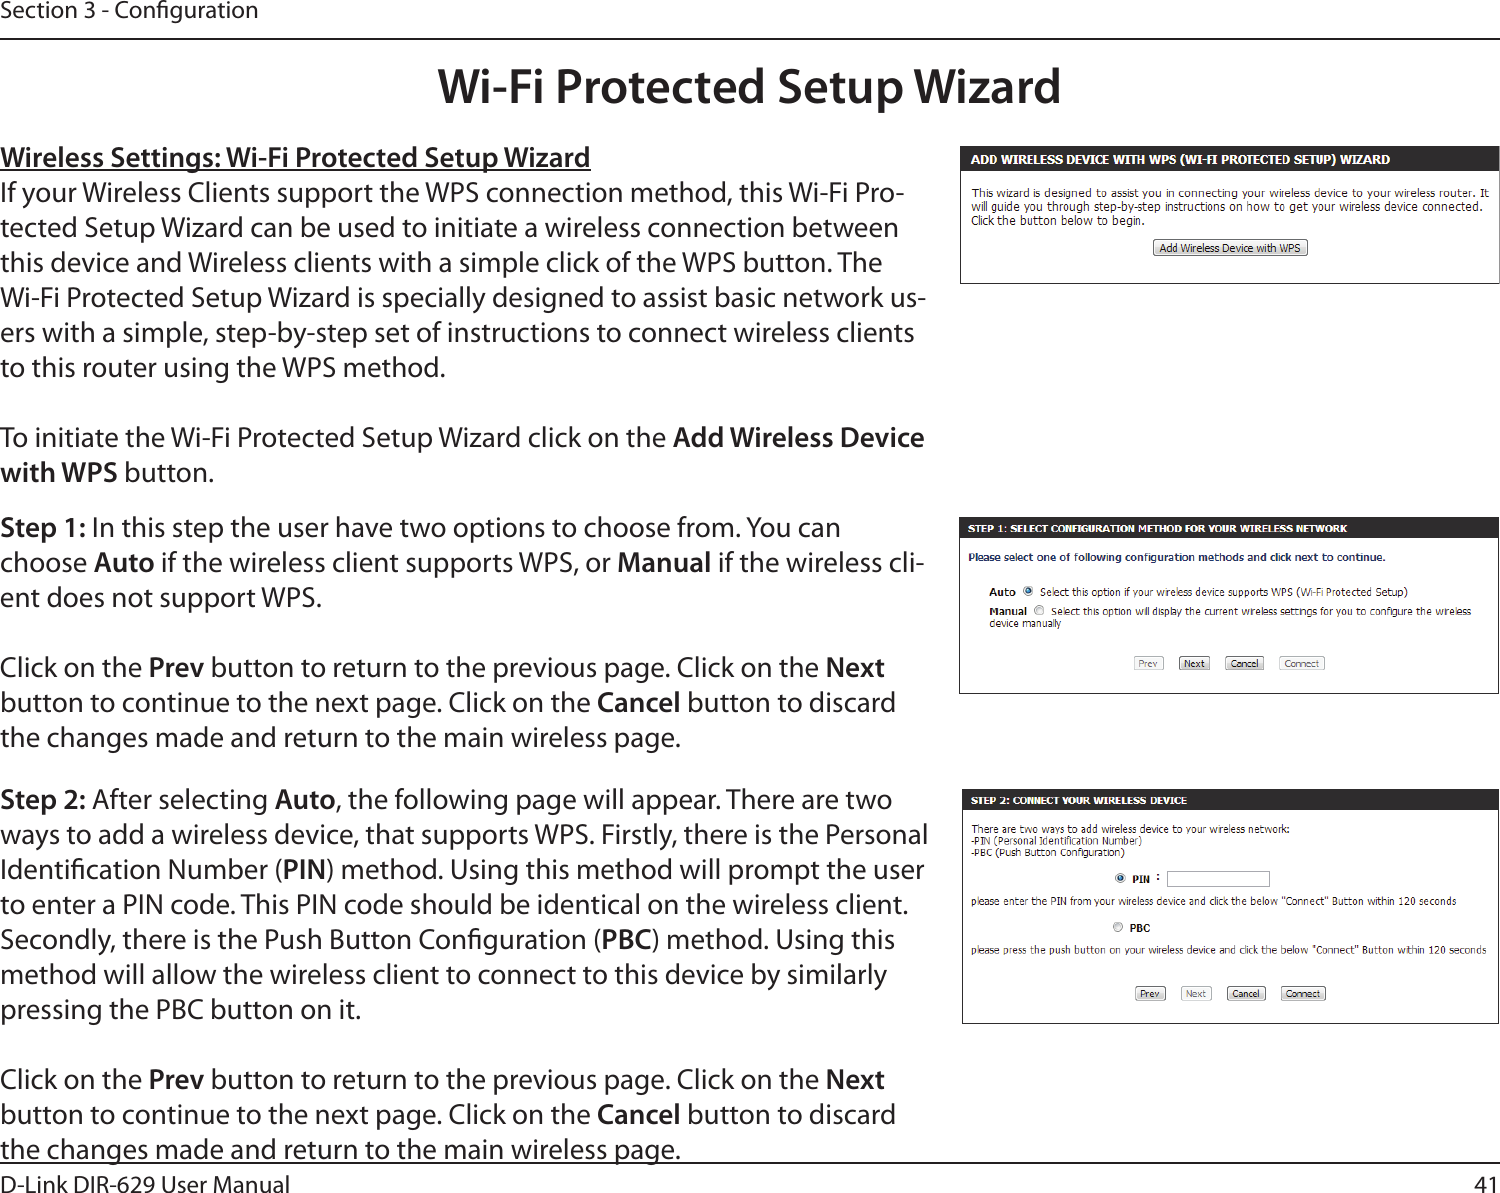 41D-Link DIR-629 User ManualSection 3 - CongurationWireless Settings: Wi-Fi Protected Setup WizardIf your Wireless Clients support the WPS connection method, this Wi-Fi Pro-tected Setup Wizard can be used to initiate a wireless connection between this device and Wireless clients with a simple click of the WPS button. The Wi-Fi Protected Setup Wizard is specially designed to assist basic network us-ers with a simple, step-by-step set of instructions to connect wireless clients to this router using the WPS method.To initiate the Wi-Fi Protected Setup Wizard click on the Add Wireless Device with WPS button.Step 1:choose Auto if the wireless client supports WPS, or Manual if the wireless cli-ent does not support WPS.Click on the Prev button to return to the previous page. Click on the Next button to continue to the next page. Click on the Cancel button to discard the changes made and return to the main wireless page.Step 2: After selecting Auto, the following page will appear. There are two ways to add a wireless device, that supports WPS. Firstly, there is the Personal Identication Number (PIN) method. Using this method will prompt the user to enter a PIN code. This PIN code should be identical on the wireless client. PBC) method. Using this method will allow the wireless client to connect to this device by similarly Click on the Prev button to return to the previous page. Click on the Next button to continue to the next page. Click on the Cancel button to discard the changes made and return to the main wireless page.Wi-Fi Protected Setup Wizard